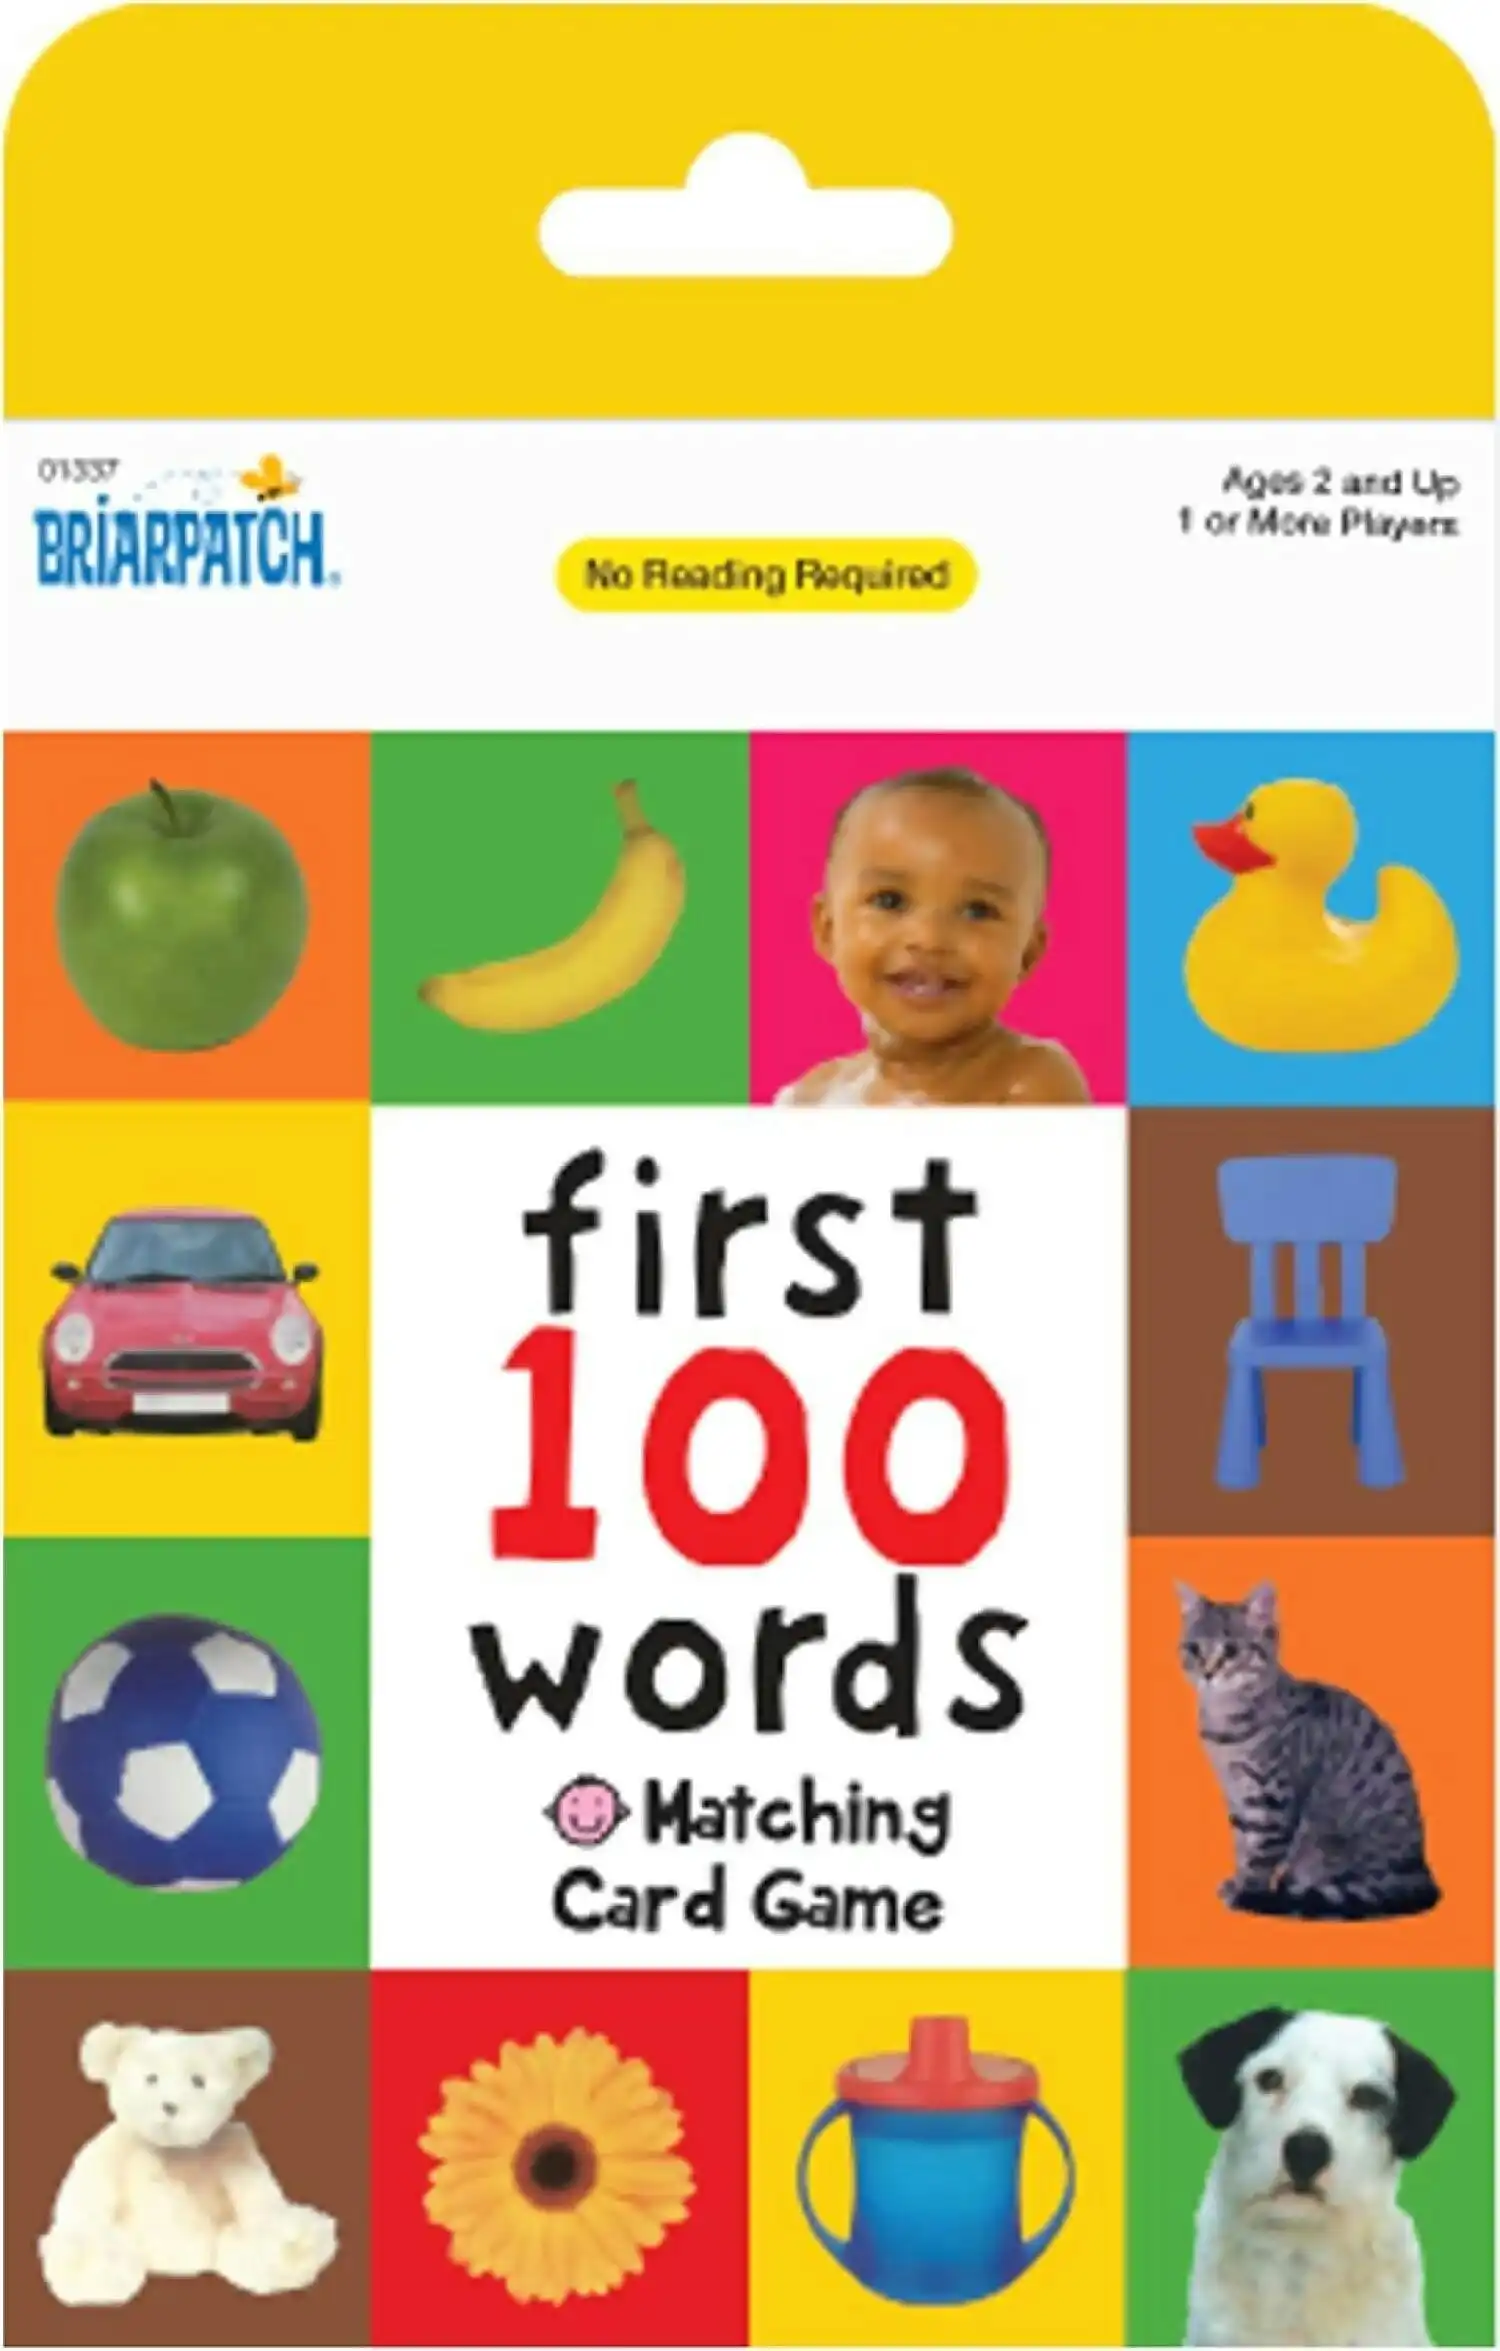 U Games - First 100 Words Matching Card Game - Briarpatch